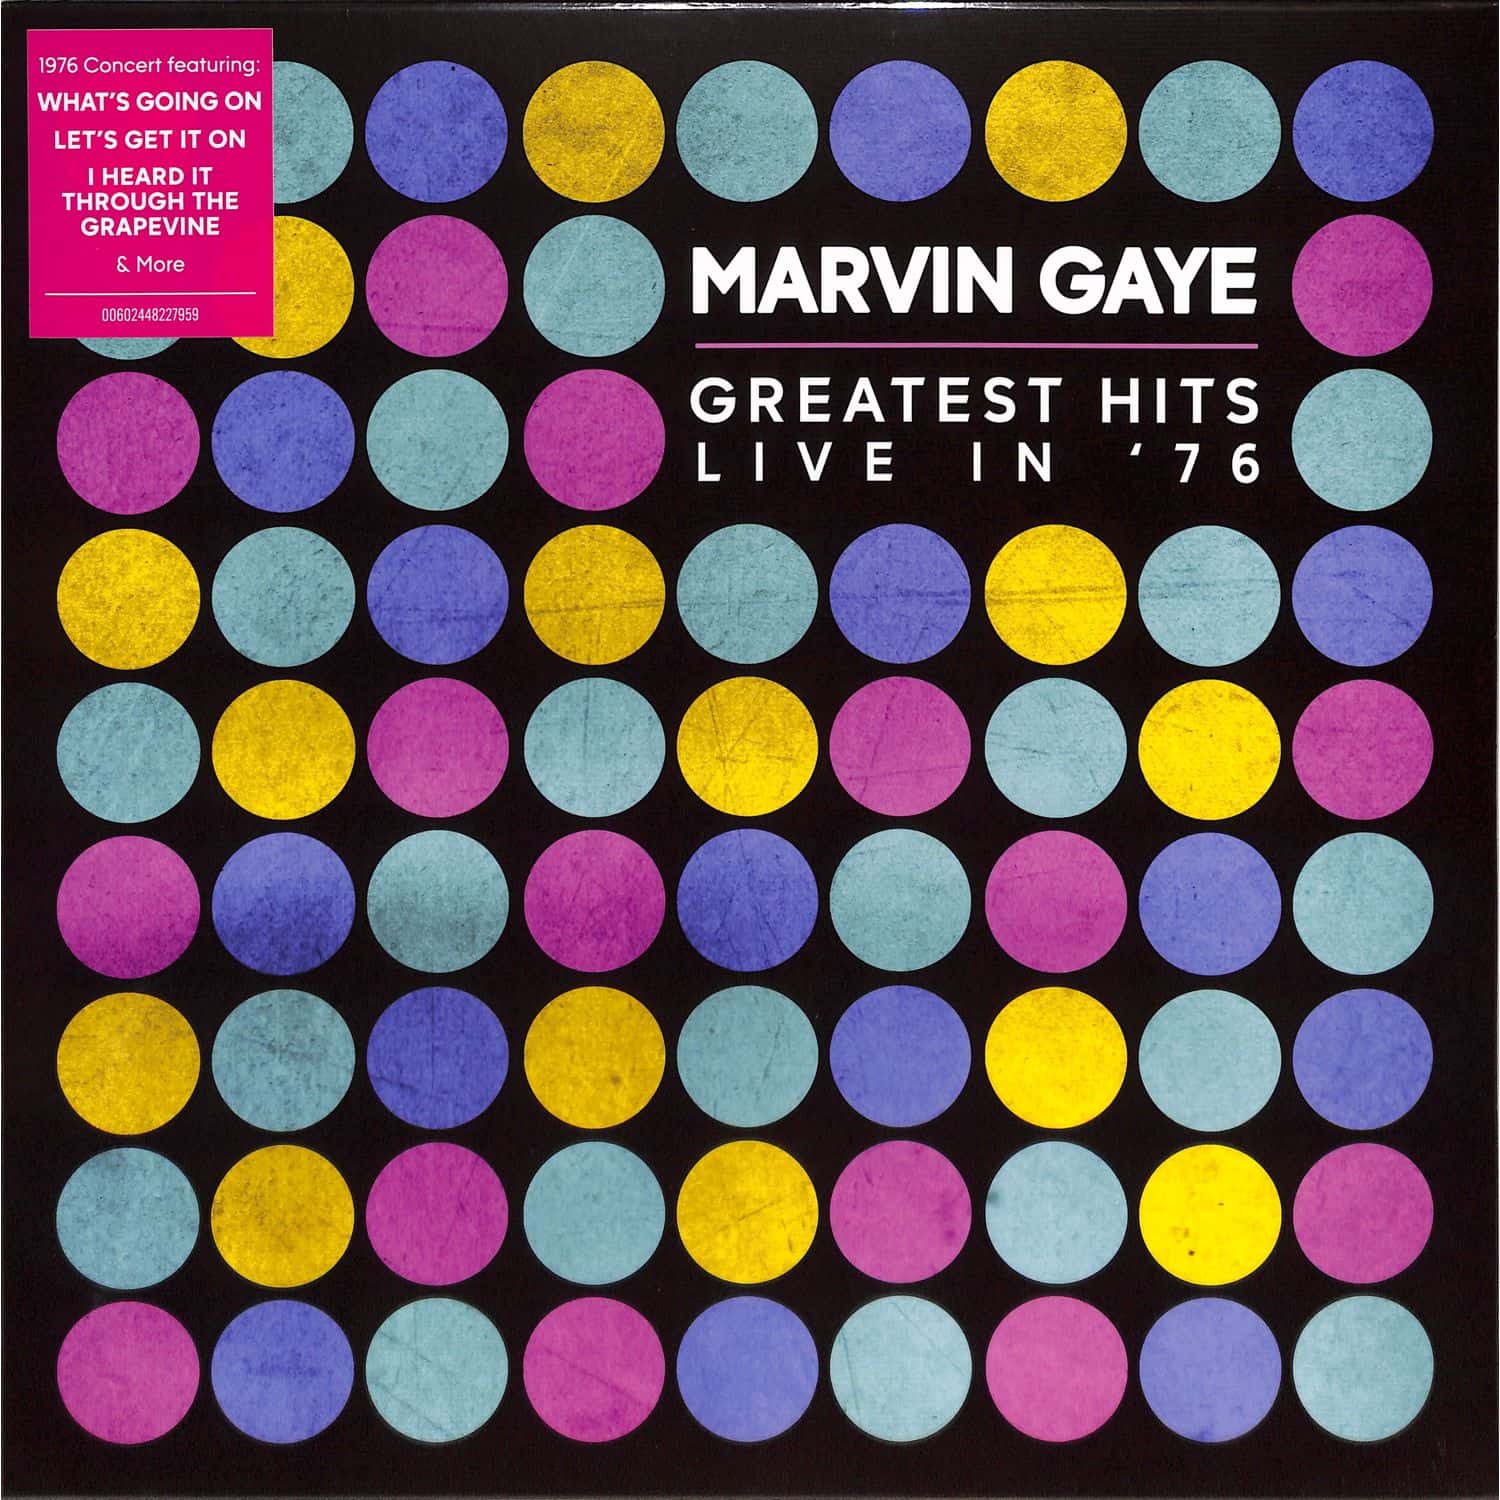 Marvin Gaye - GREATEST HITS LIVE IN 76 